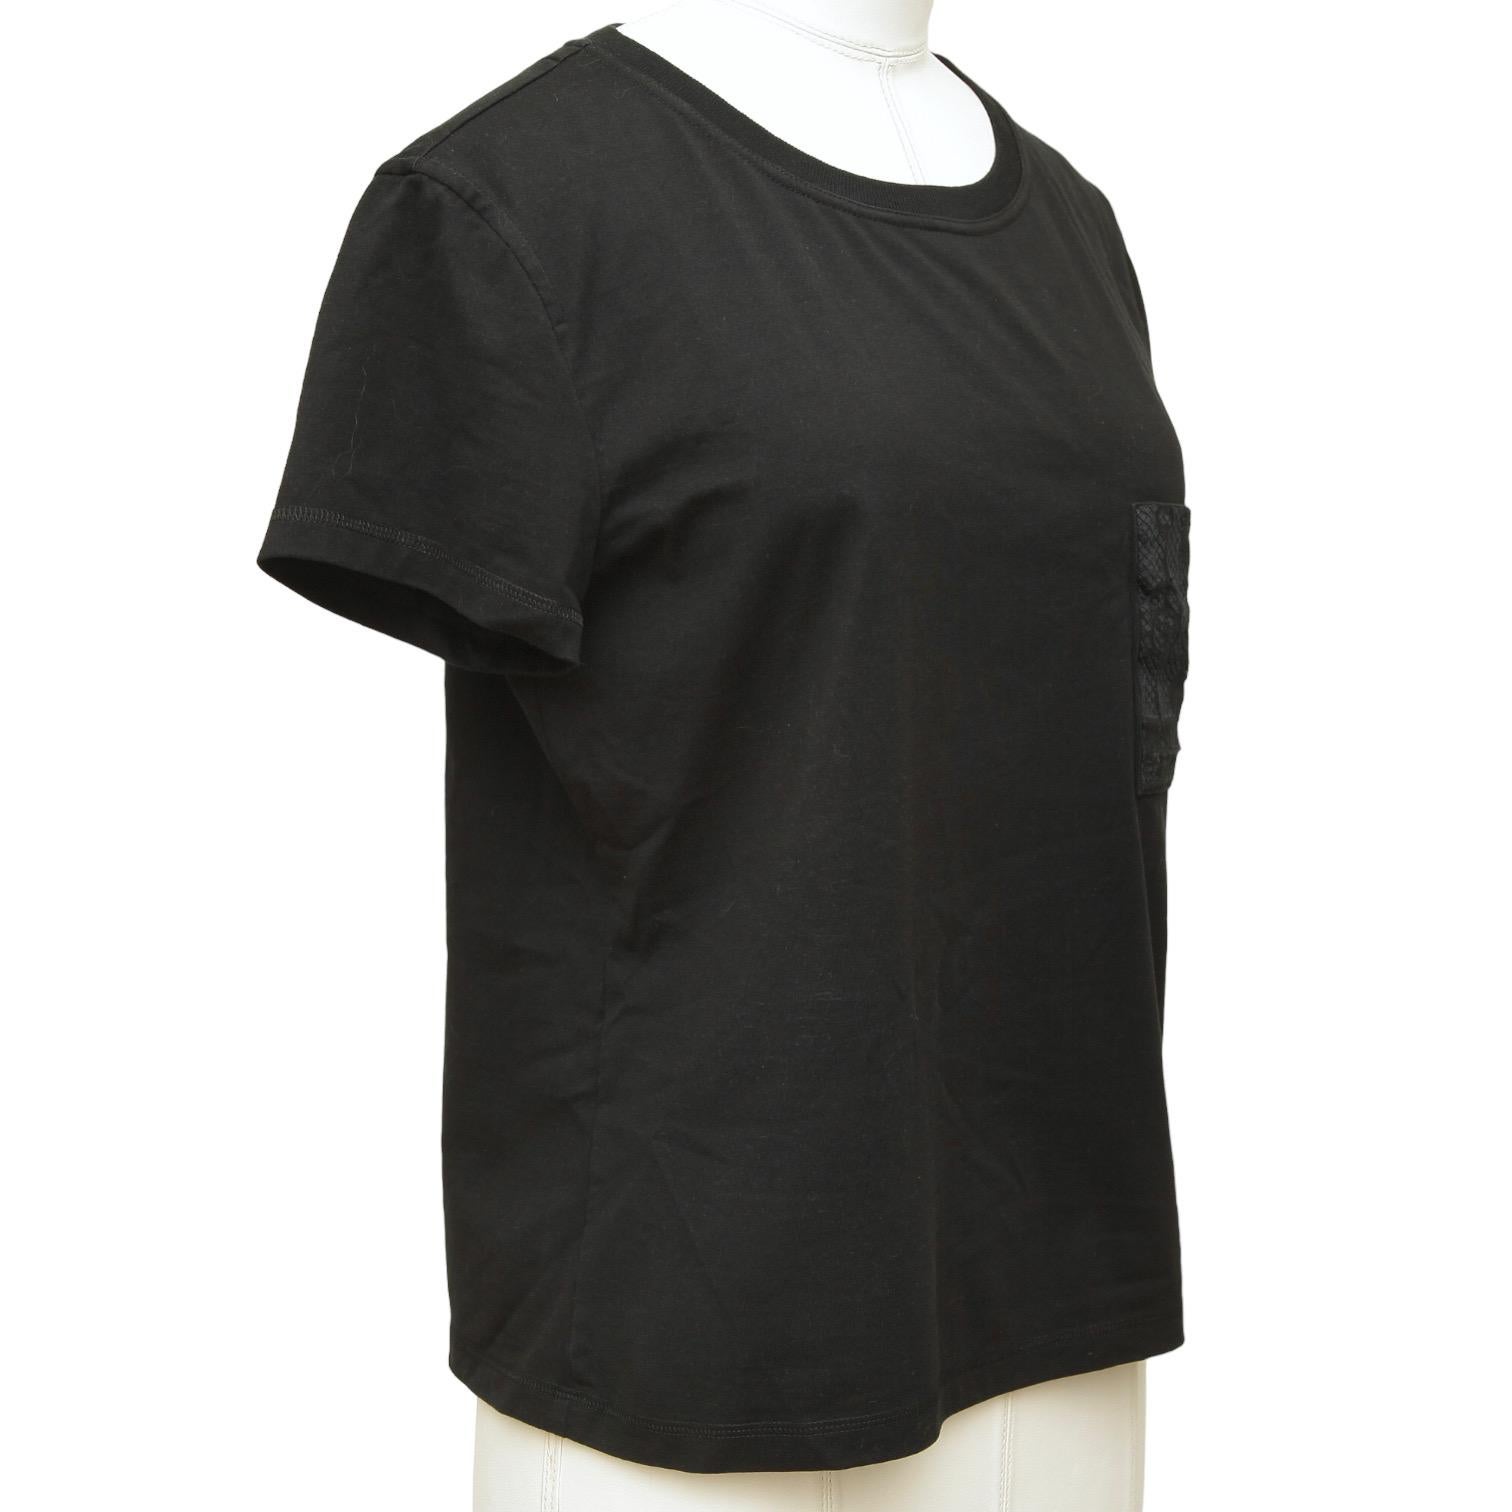 GUARANTEED AUTHENTIC HERMES MOSAIQUE EMBROIDERY BLACK T SHIRT

Design:
- Black mosaique embroidery pocket t-shirt.
- Crew neck.
- Short sleeve.
- Slip on.

Size: 38

Material: 100% Cotton

Measurements (Approximate laid flat):
- Shoulder to